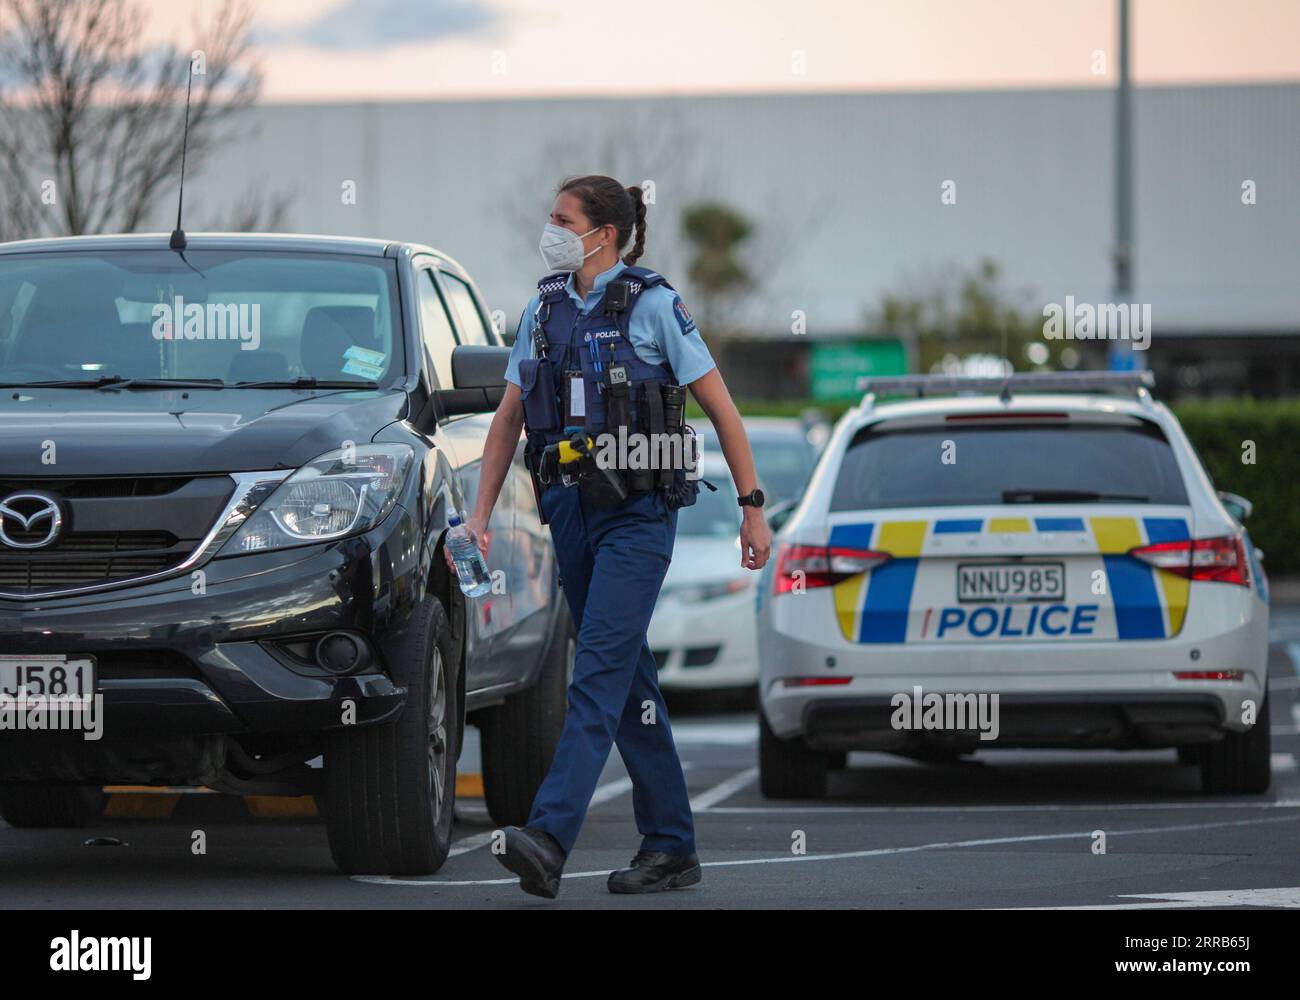 210903 -- AUCKLAND, Sept. 3, 2021 -- A police officer stands guard near the New Lynn supermarket in Auckland, New Zealand, Sept. 3, 2021. New Zealand Prime Minister Jacinda Ardern confirmed that the violent attack that happened at New Lynn supermarket in Auckland at 2:40 p.m. local time Friday was a terrorist attack carried out by an extremist. Photo by /Xinhua NEW ZEALAND-AUCKLAND-SUPERMARKET-TERRORIST ATTACK ZhaoxGang PUBLICATIONxNOTxINxCHN Stock Photo